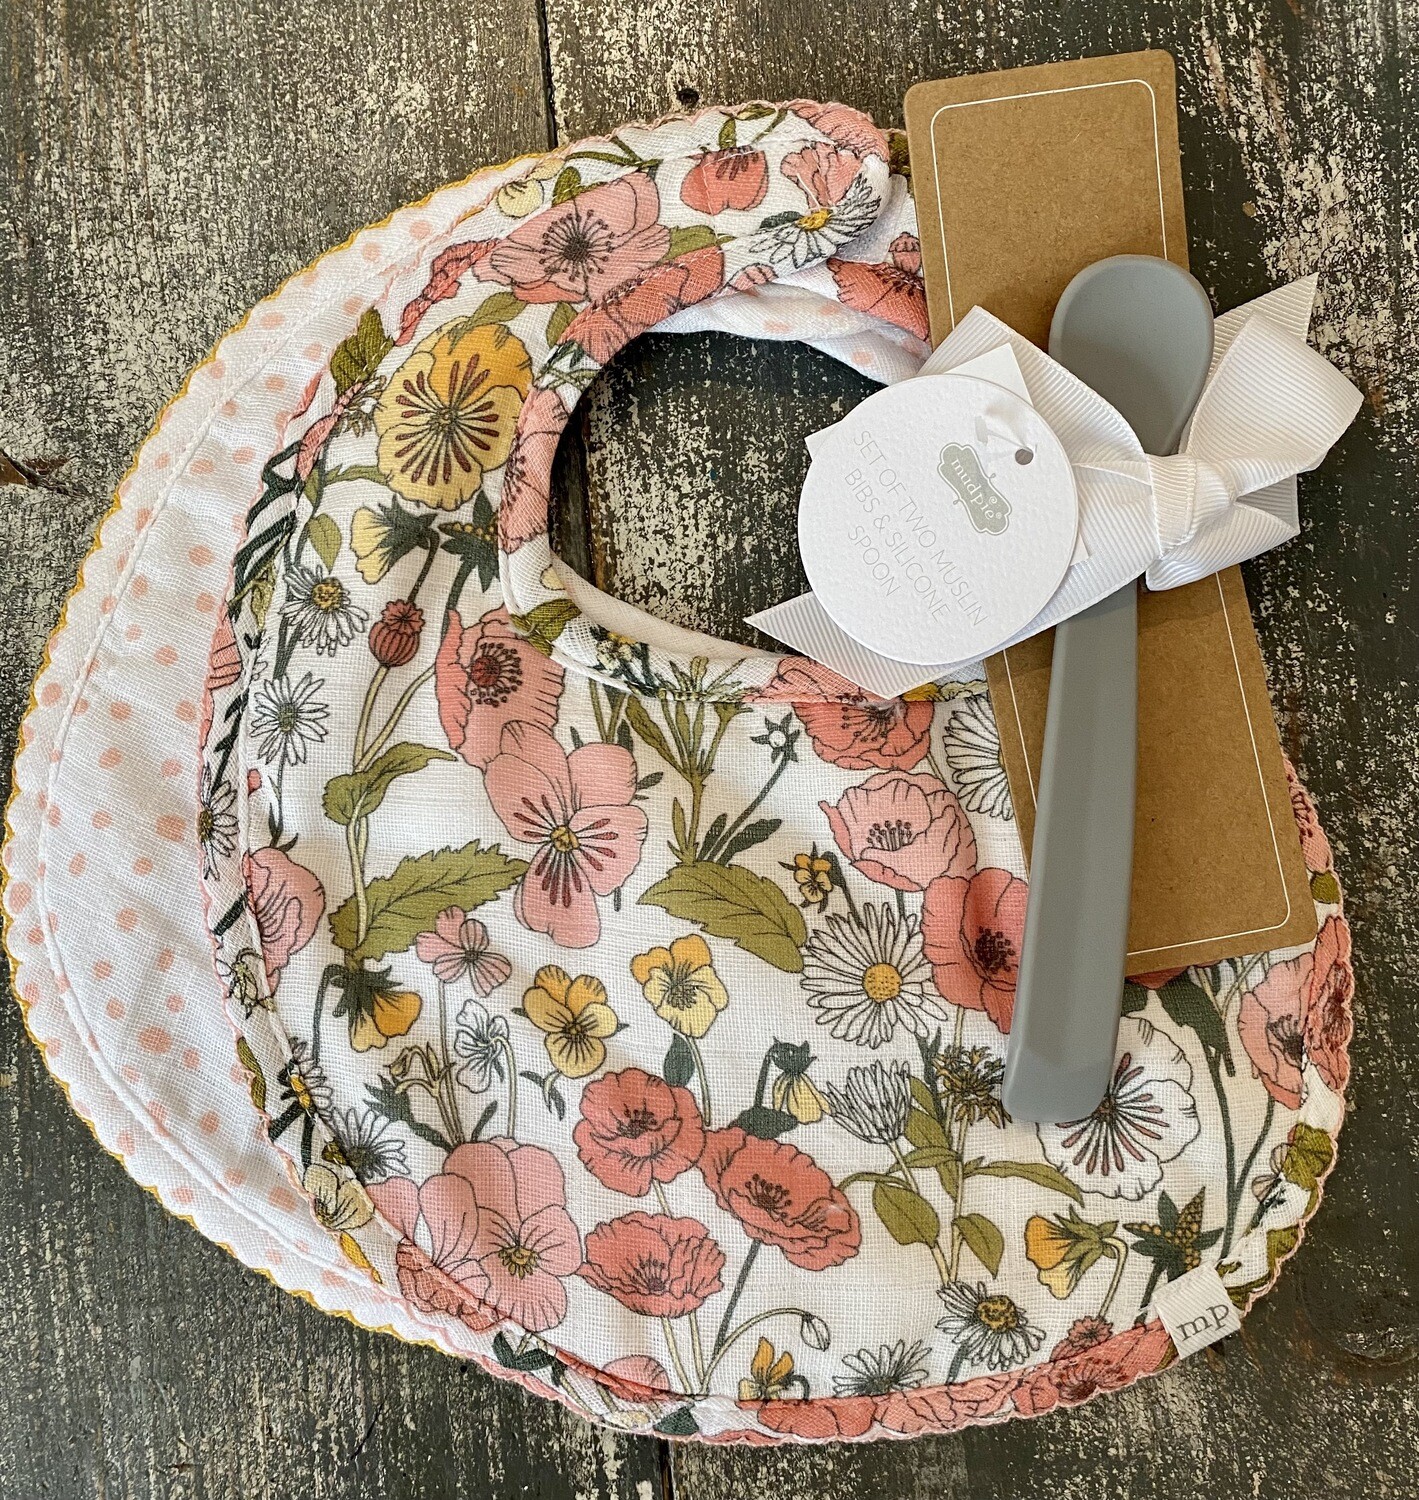 Floral bib and spoon set